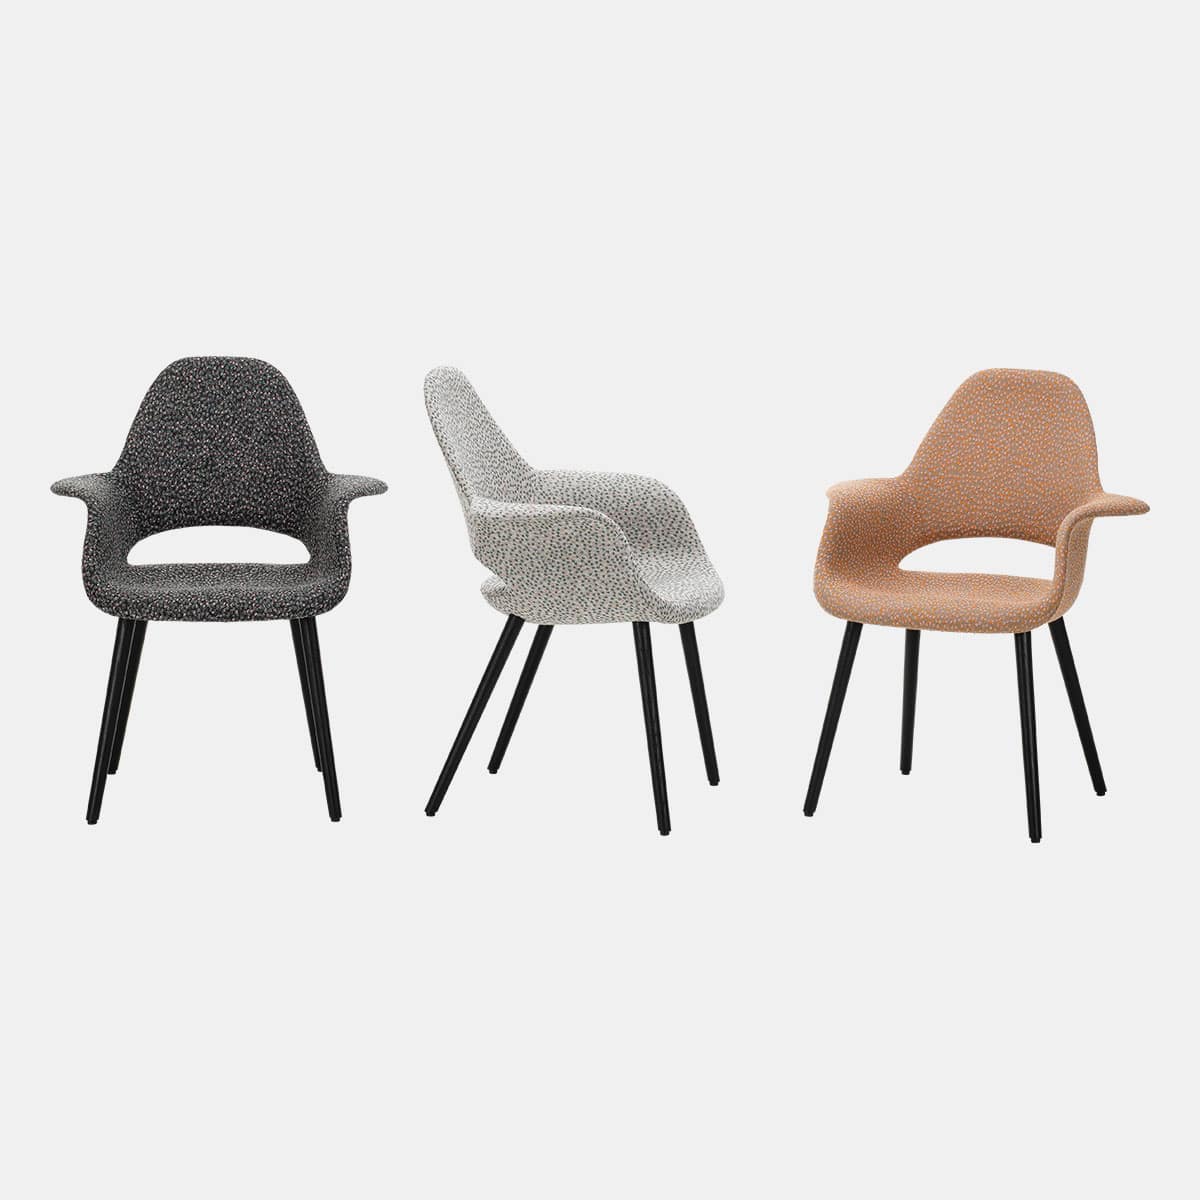 vitra-charles-ray-eames-organic-conference-chair-eames-special-collection-2023-001shop